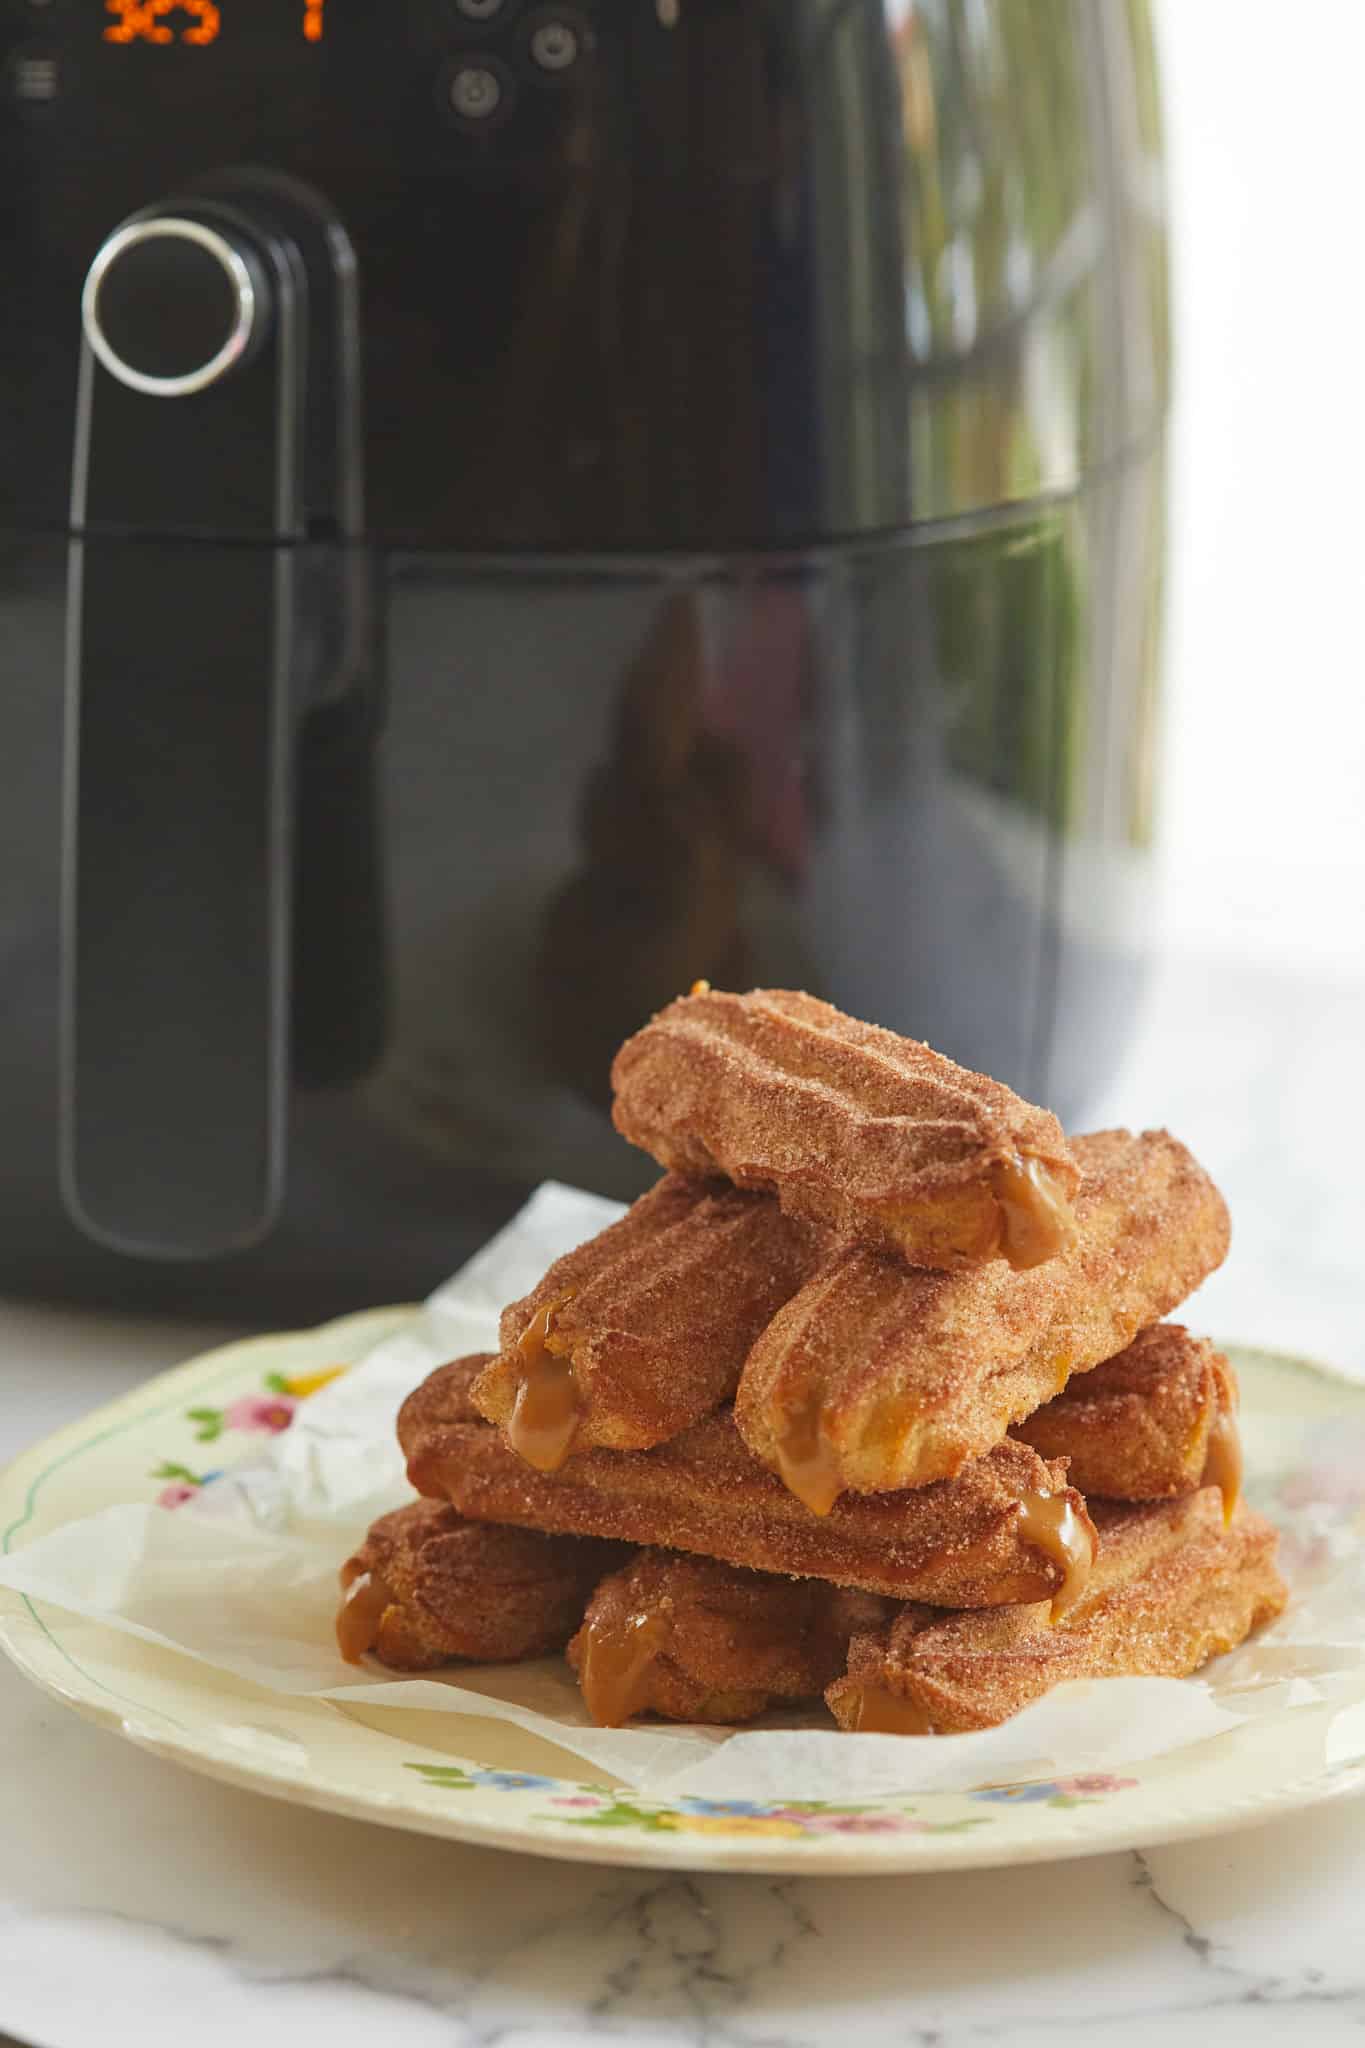 Air fryer churros stacked, filled with dulce de leche, in front of an air fryer.